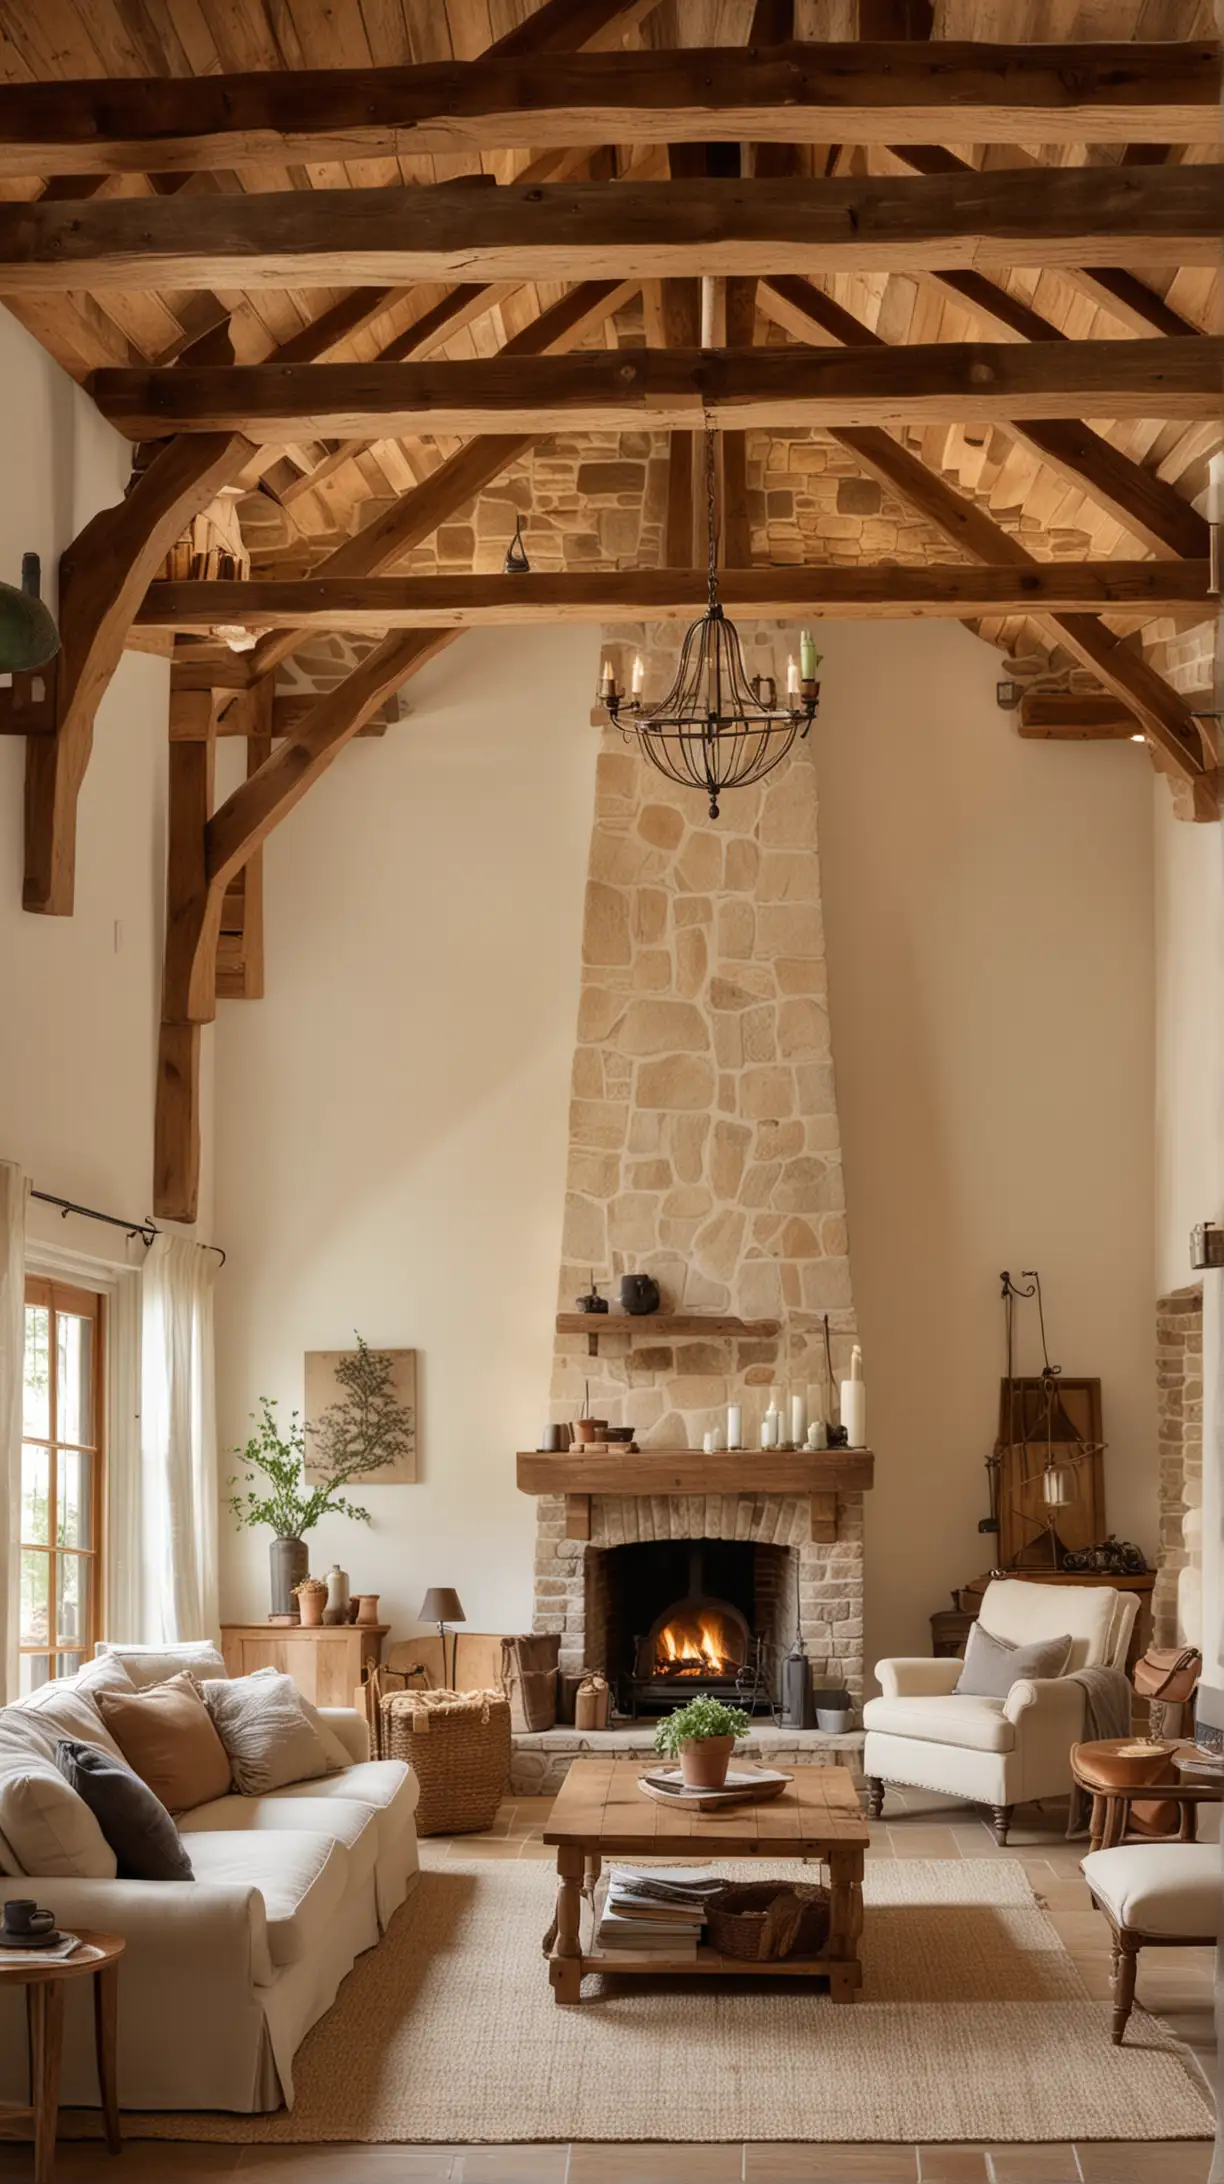 Cozy Country Living Room with Exposed Wooden Beams and Warm Lighting